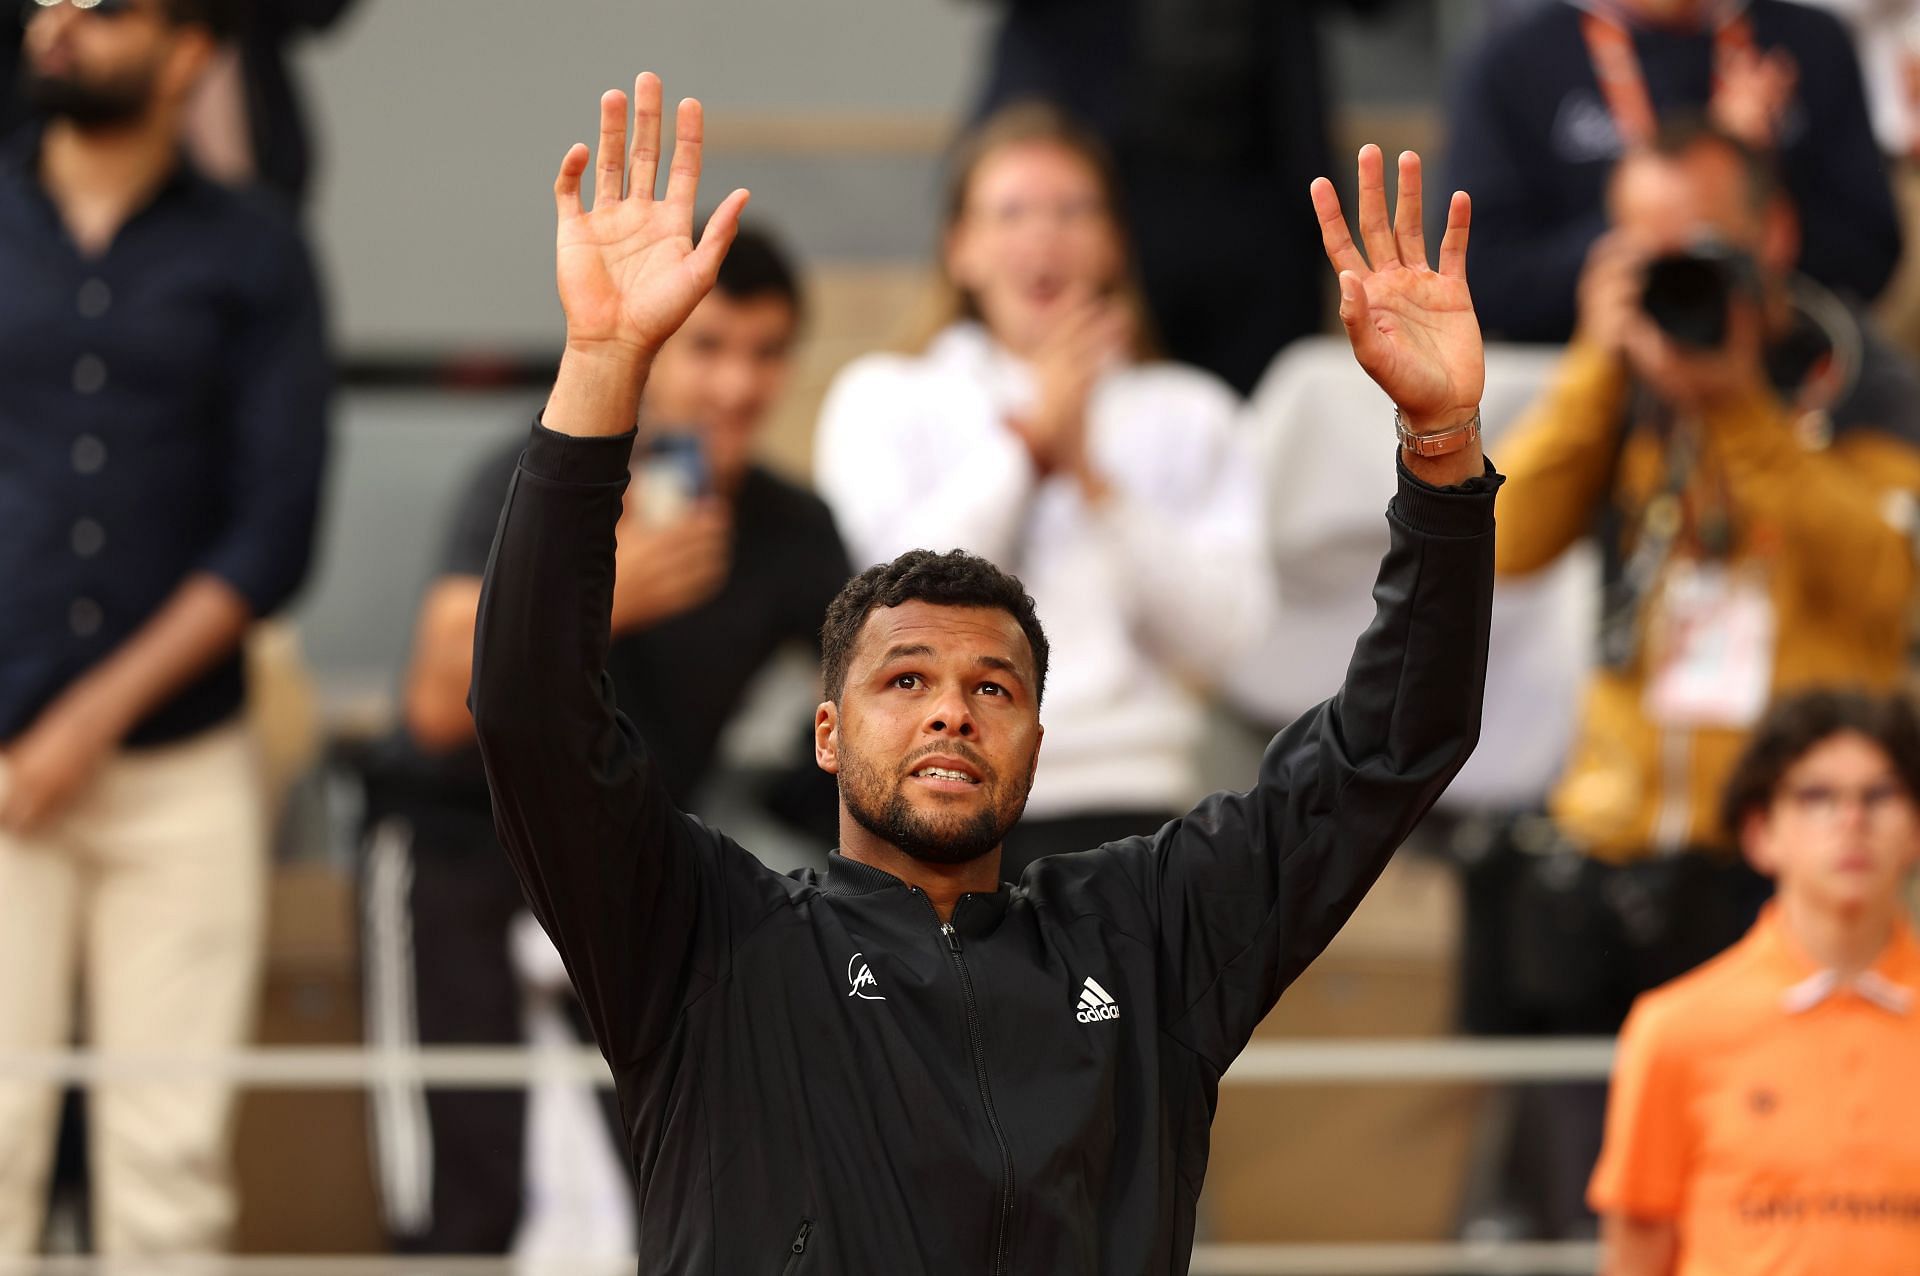 Jo-Wilfried Tsonga waves to the crowd during a presentation ceremony after his final career match at the 2022 Roland Garros.